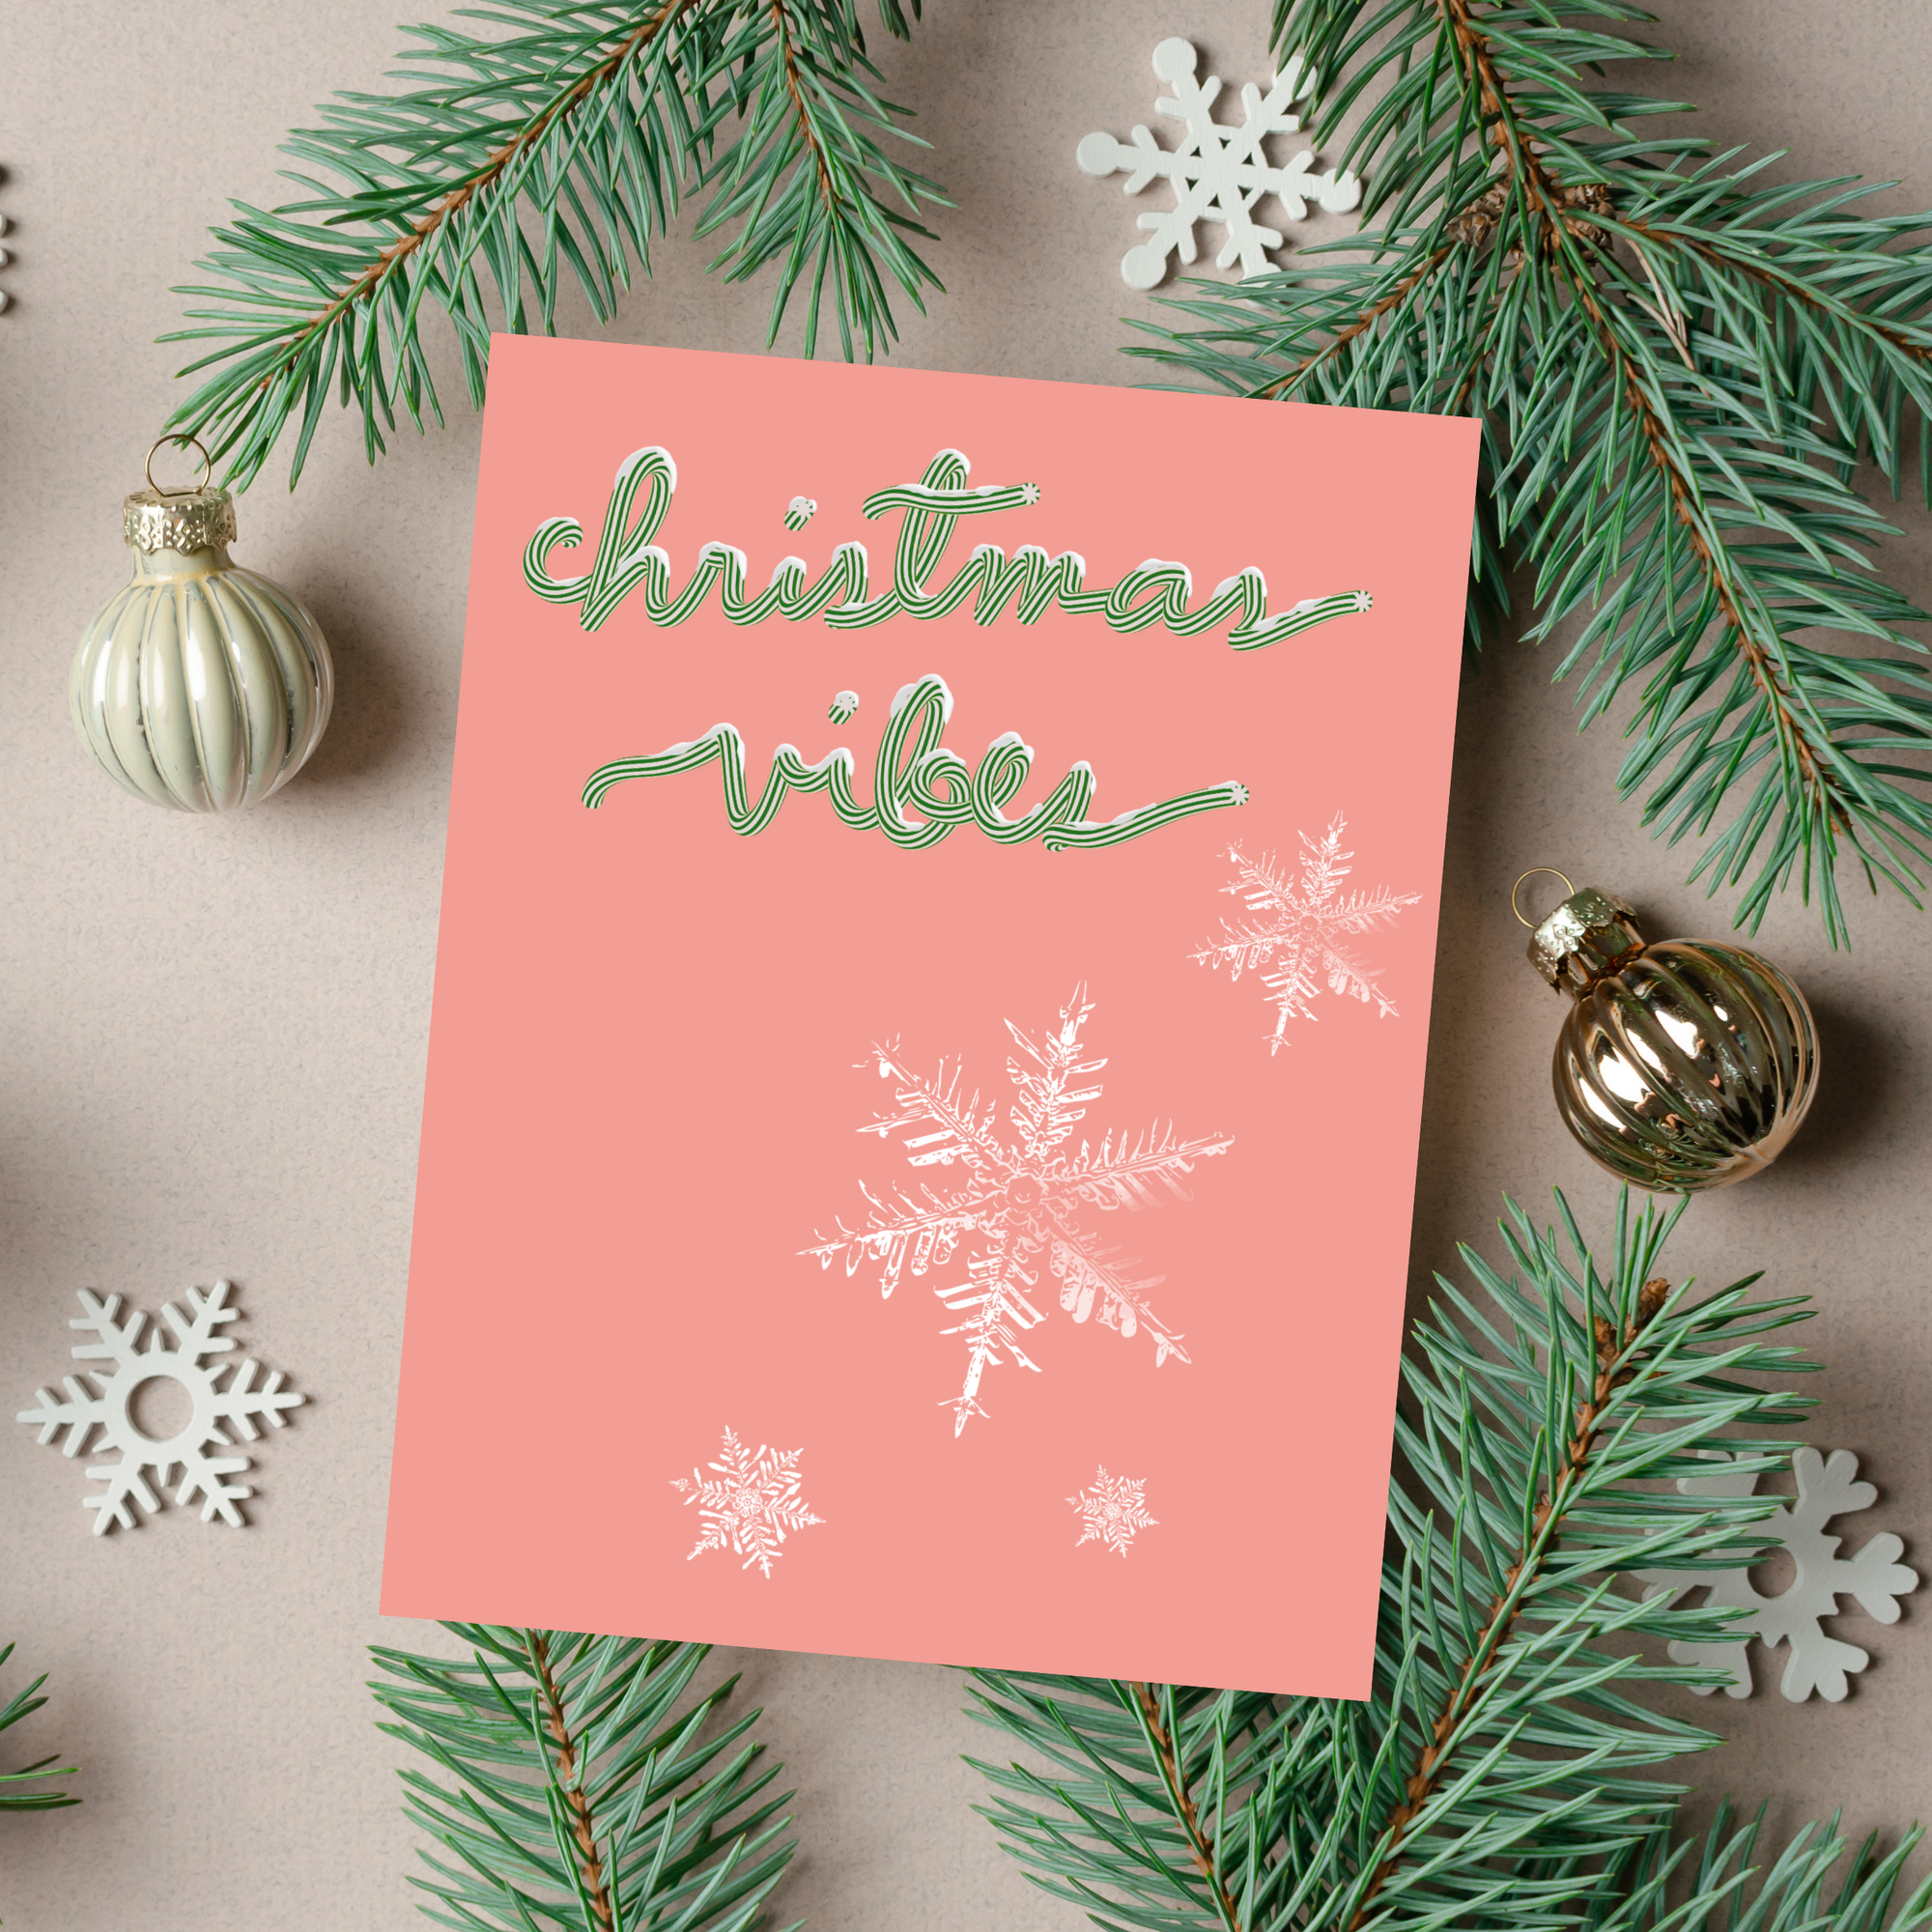 Christmas Vibes Pink Candy Cane Card